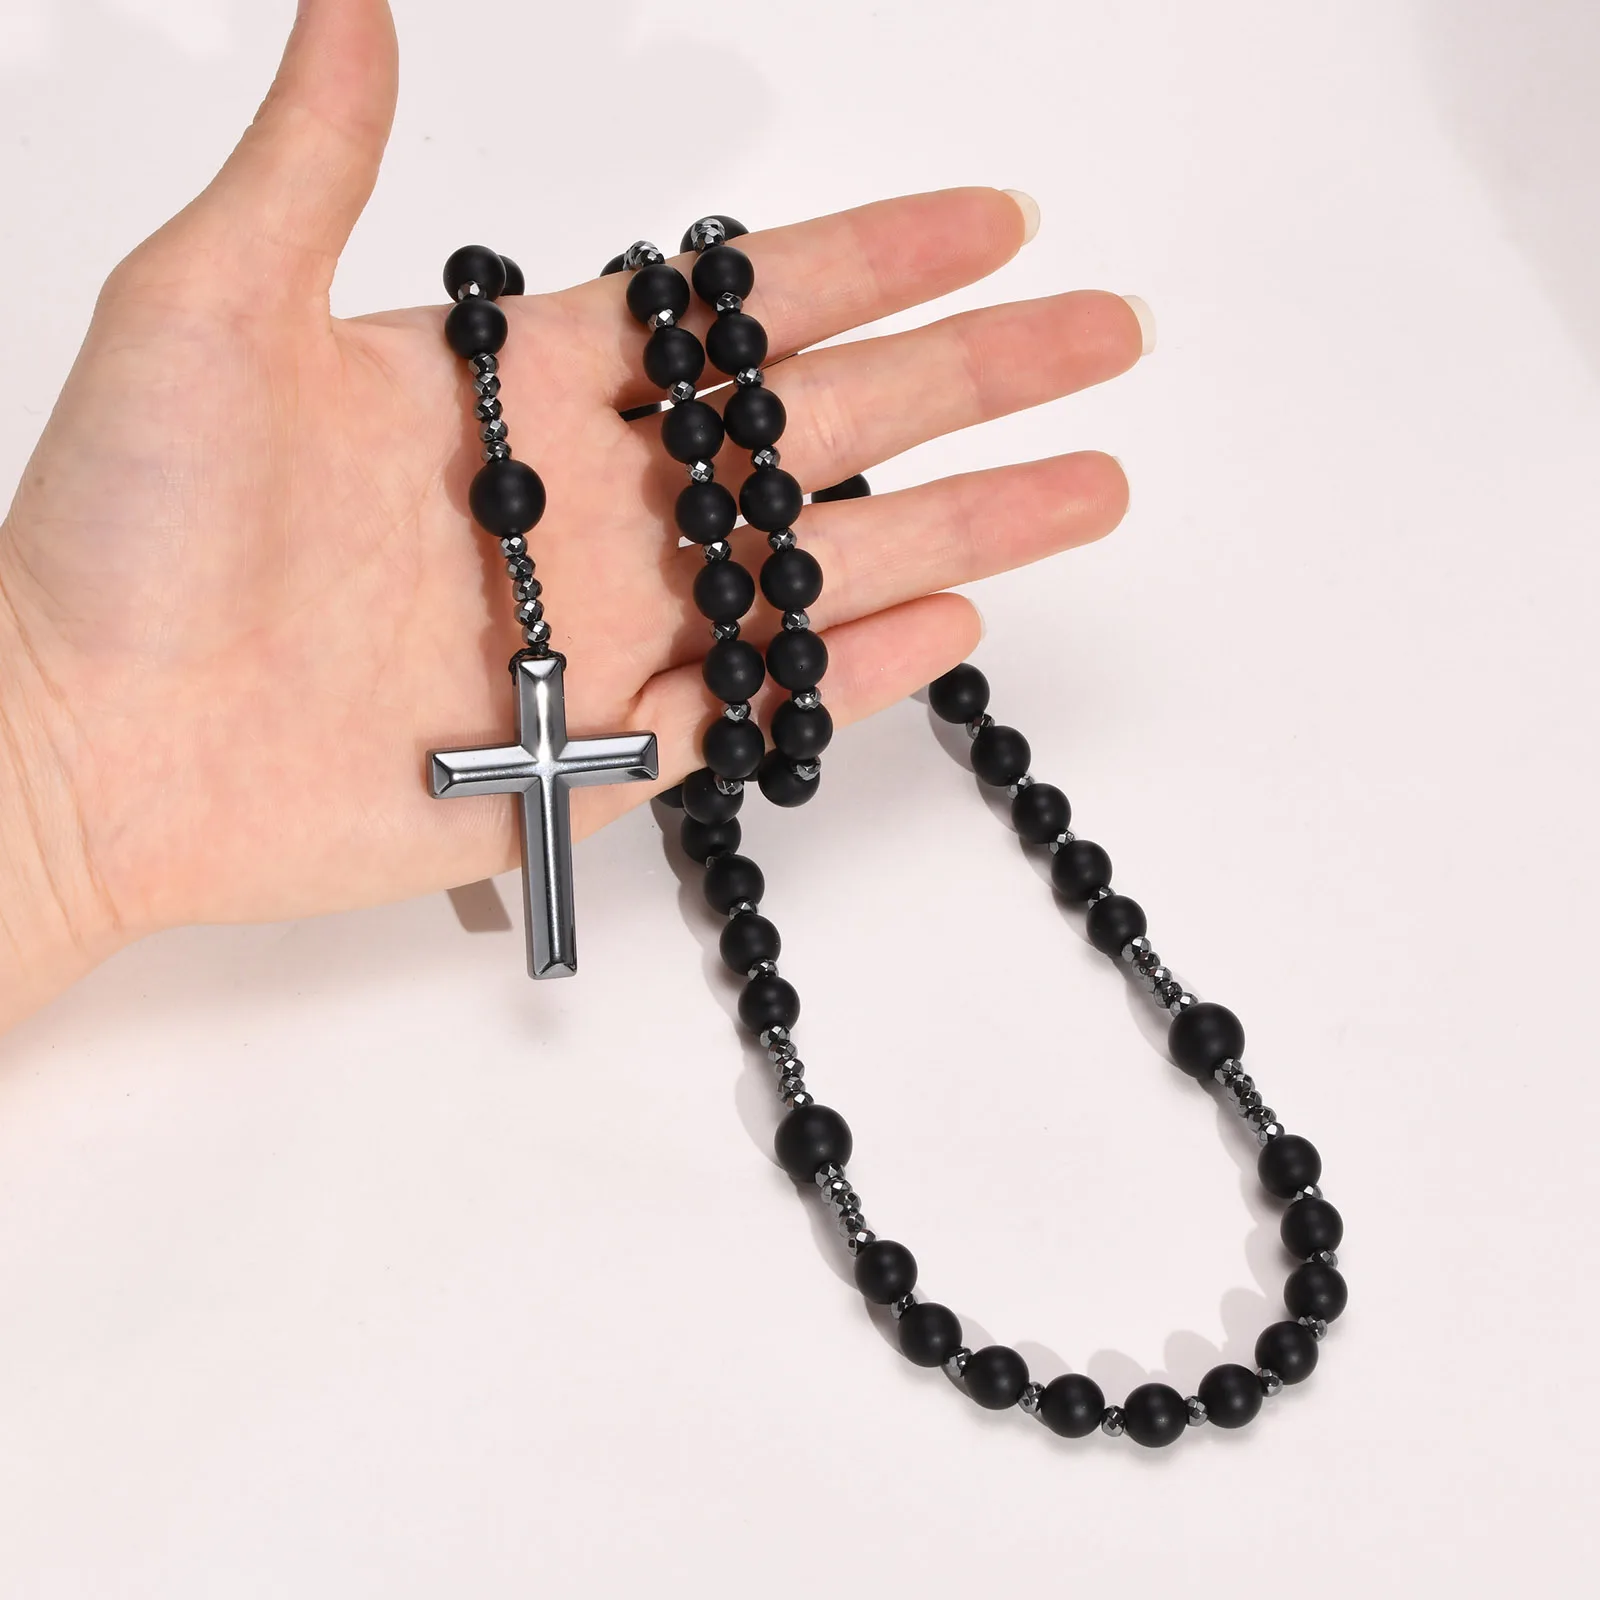 Black Beads Cross Rosary Necklaces for Men, Male Power Balance Hematite Chain Necklace, Religious Faith Prayer Jewelry images - 6